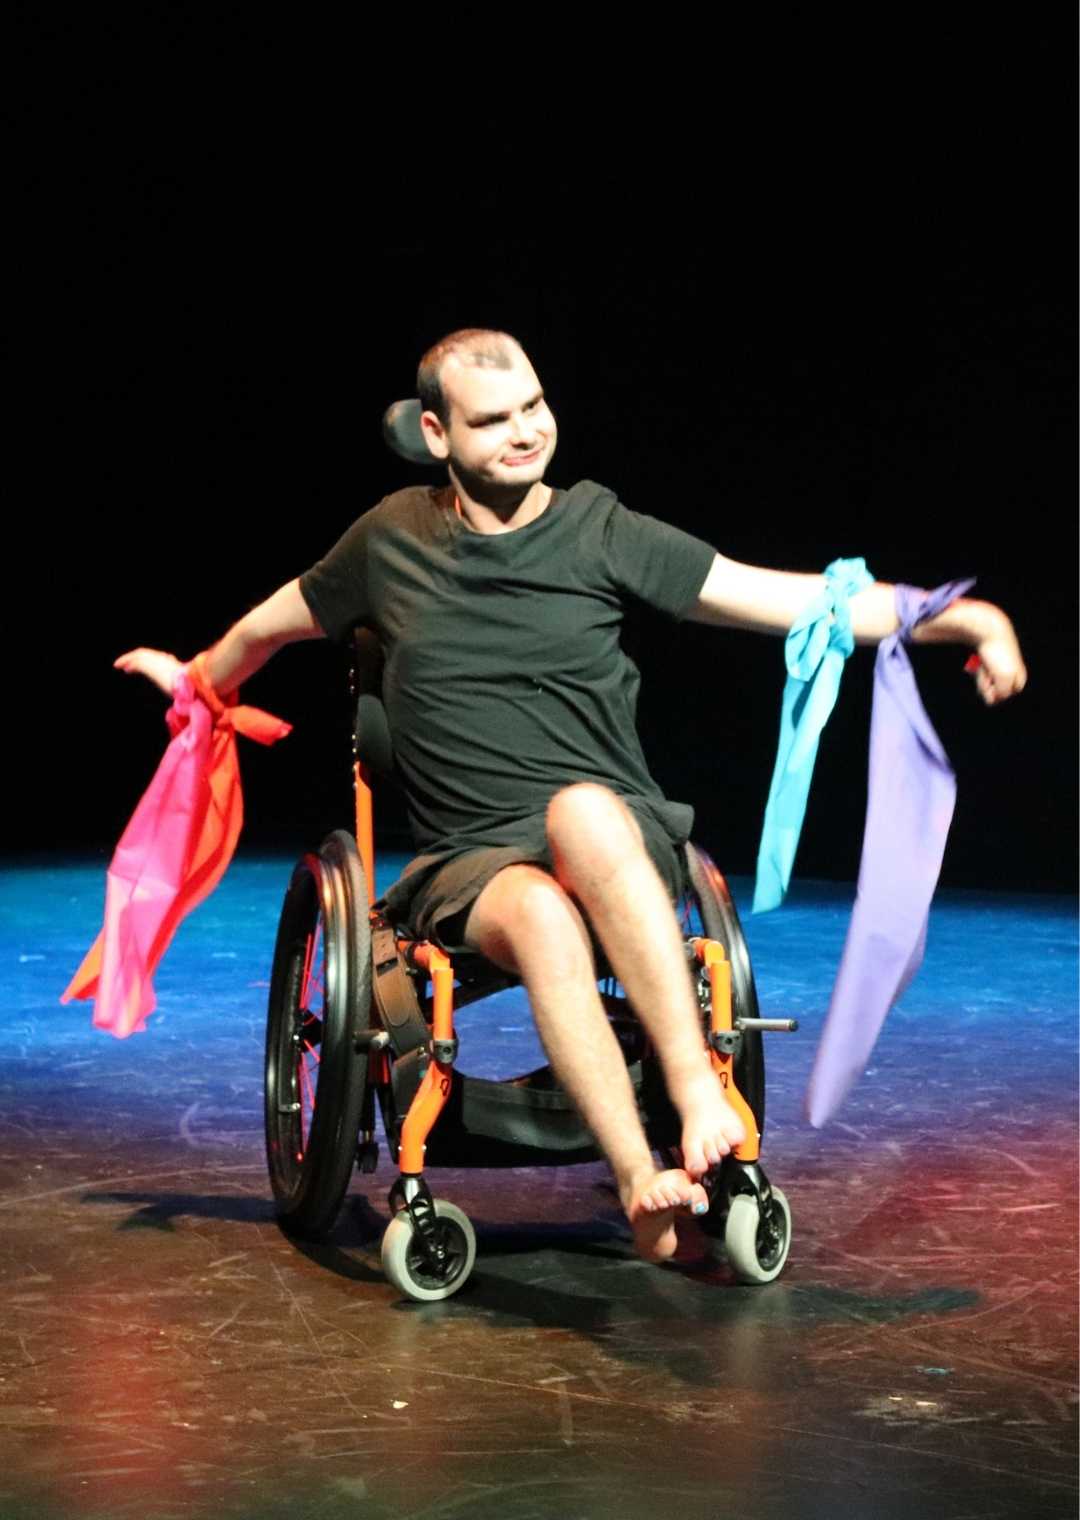 A person perfoming on stage. They have coloured ribbons tied to each of their wrists and are seated in a wheelchair